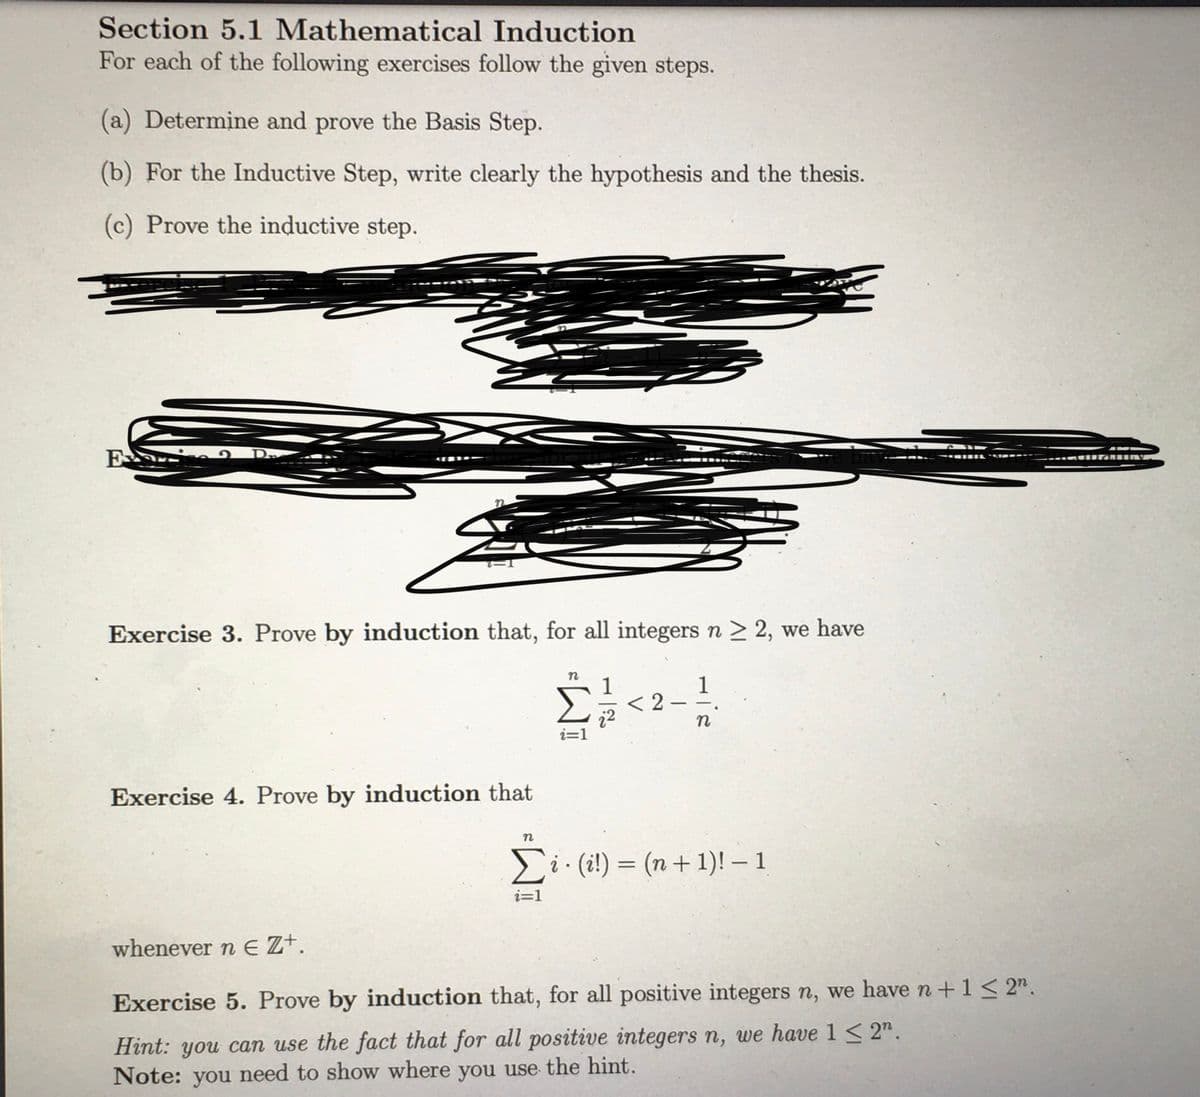 Section 5.1 Mathematical Induction
For each of the following exercises follow the given steps.
(a) Determine and prove the Basis Step.
(b) For the Inductive Step, write clearly the hypothesis and the thesis.
(c) Prove the inductive step.
Exercise 3. Prove by induction that, for all integers n > 2, we have
1
1
< 2
i=1
Exercise 4. Prove by induction that
Σ
Ei. (i!) = (n+ 1)! – 1
i=1
whenever n E Z+.
Exercise 5. Prove by induction that, for all positive integers n, we have n+1< 2".
Hint: you can use the fact that for all positive integers n, we have 1 < 2".
Note: you need to show where you use the hint.
